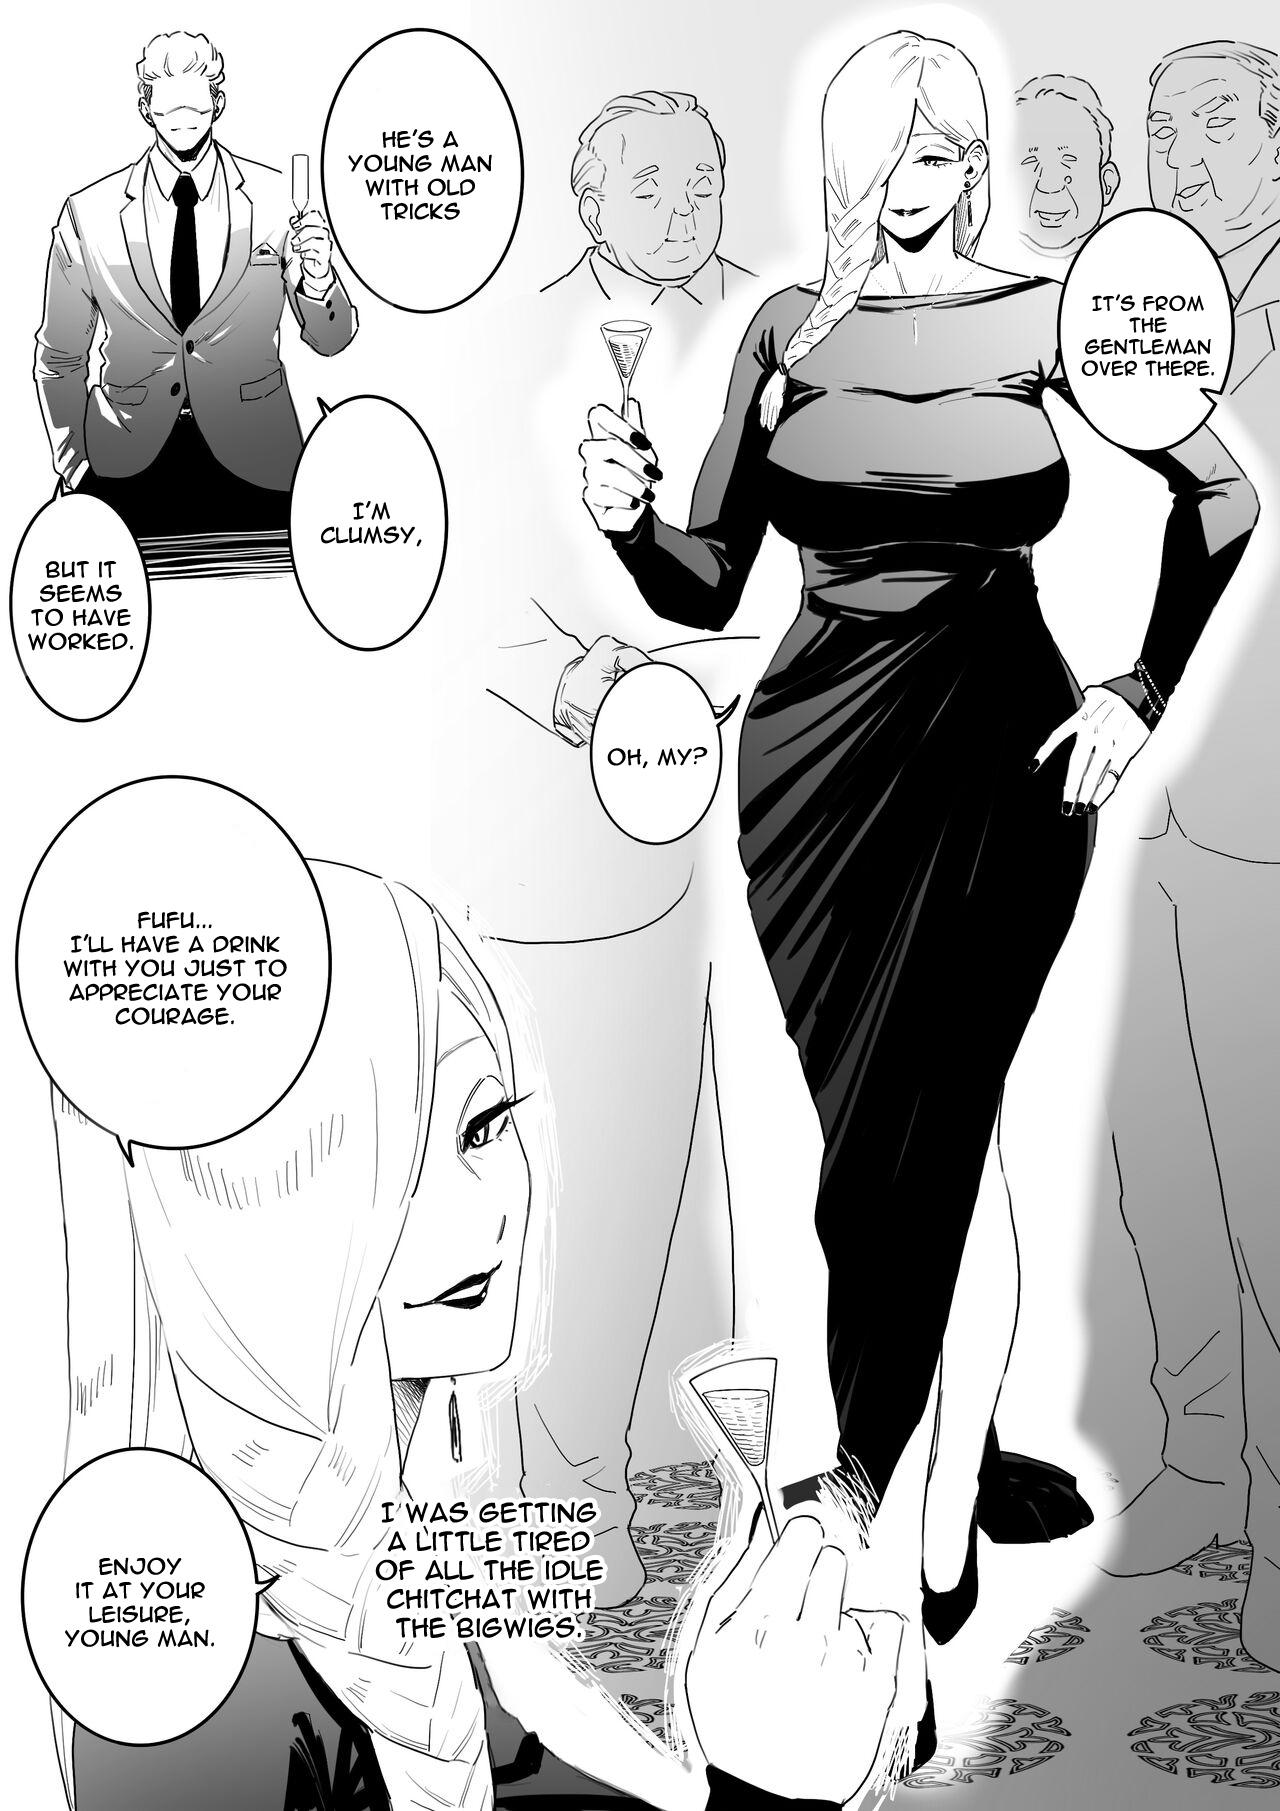 Chicks The picked up Meimei just becomes a za*n tank. - Jujutsu kaisen Hot - Page 1